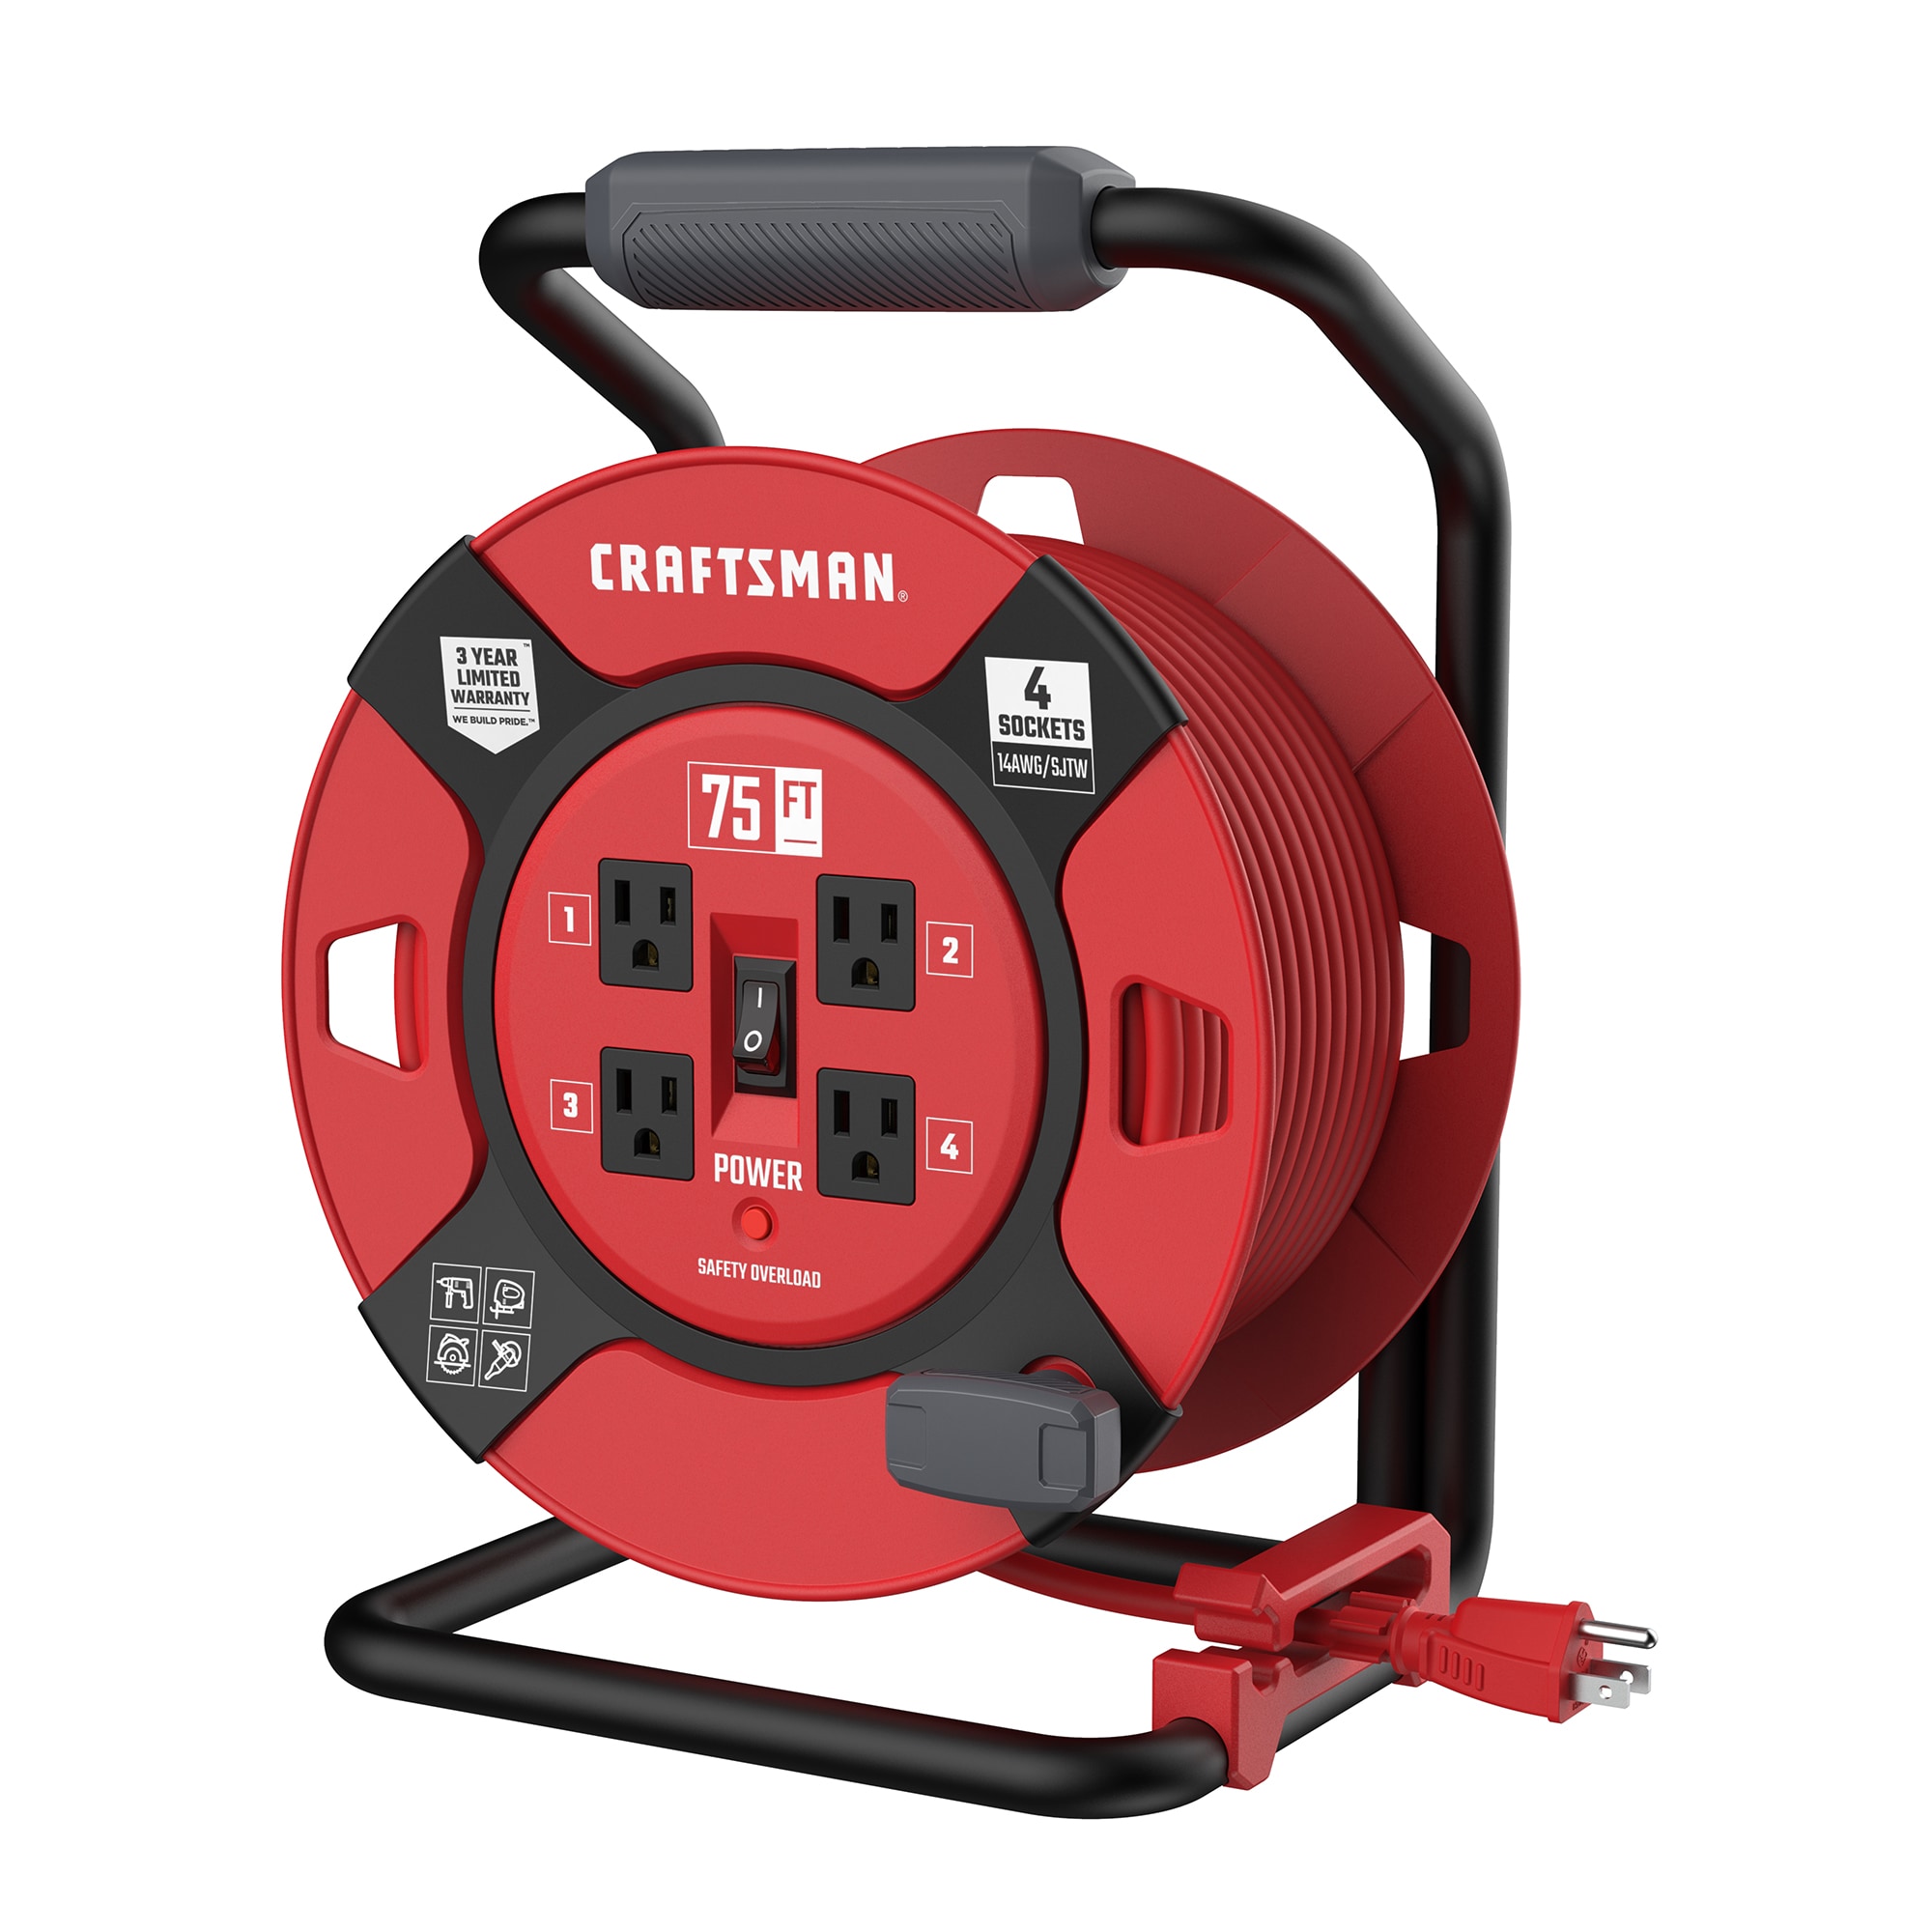 Craftsman Heavy Duty Retractable Extension Cord, 75 ft with 4 Outlets- 14AWG SJTW Cable- Outdoor Power Cord Reel